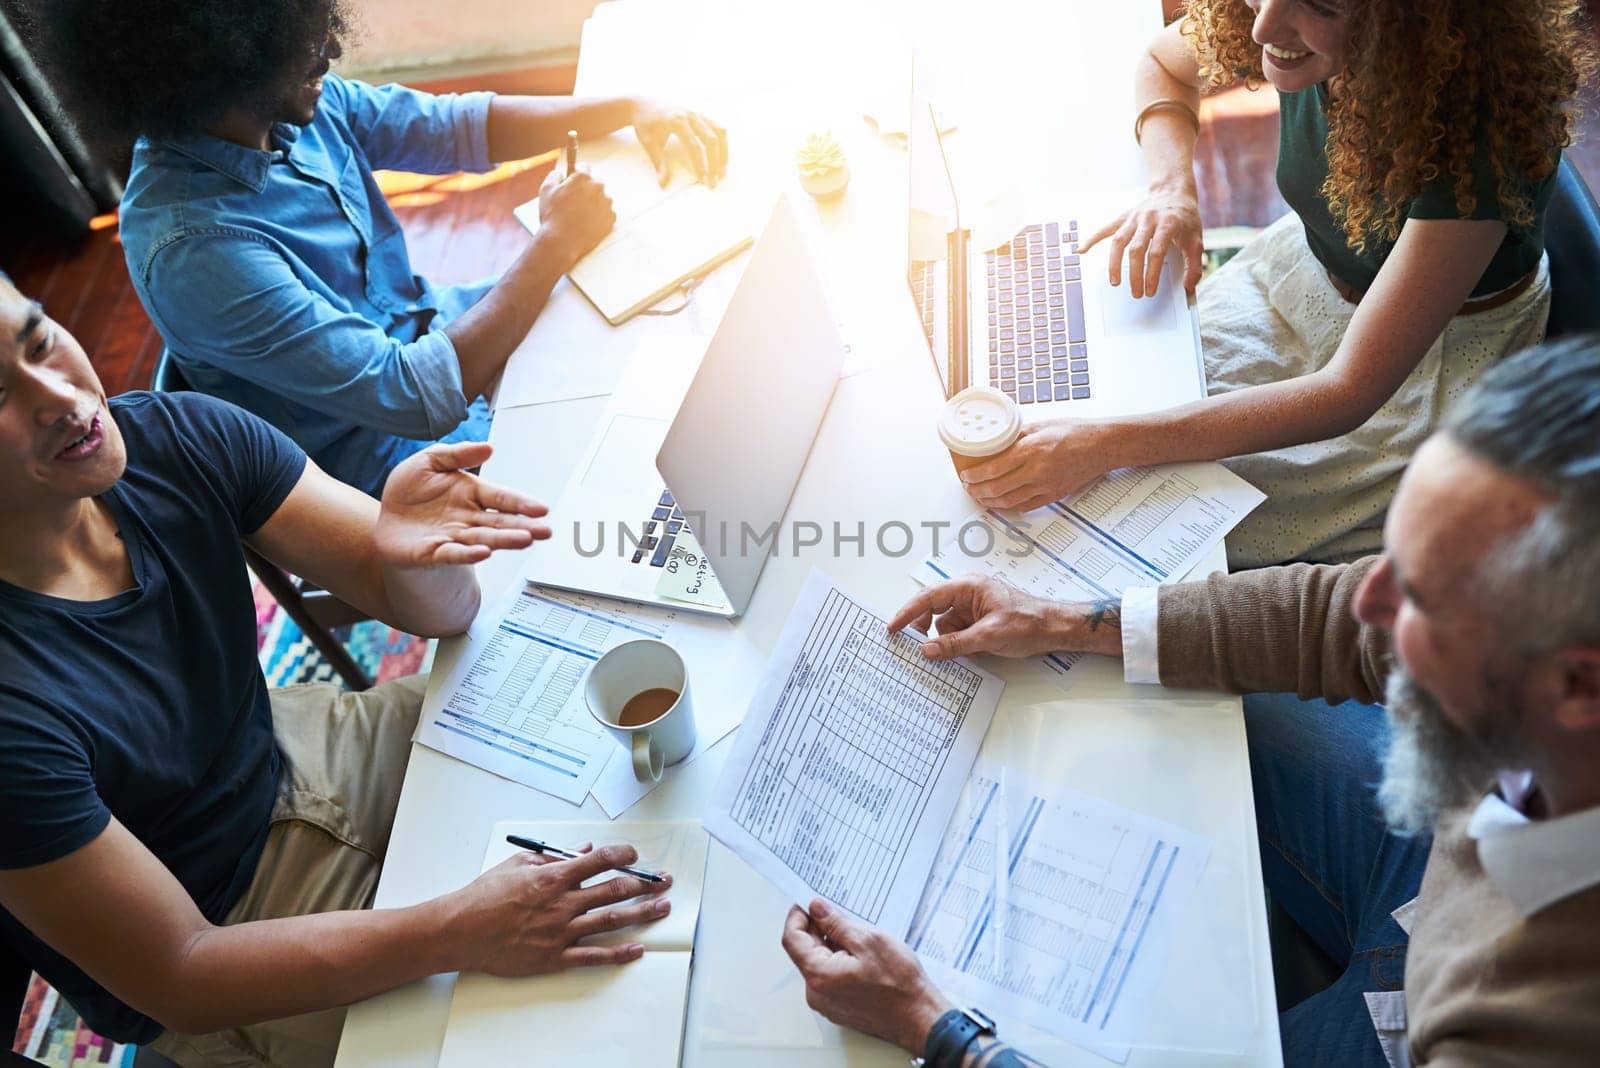 Keeping success in their forecasts. High angle shot of a group of businesspeople going through paperwork in an office